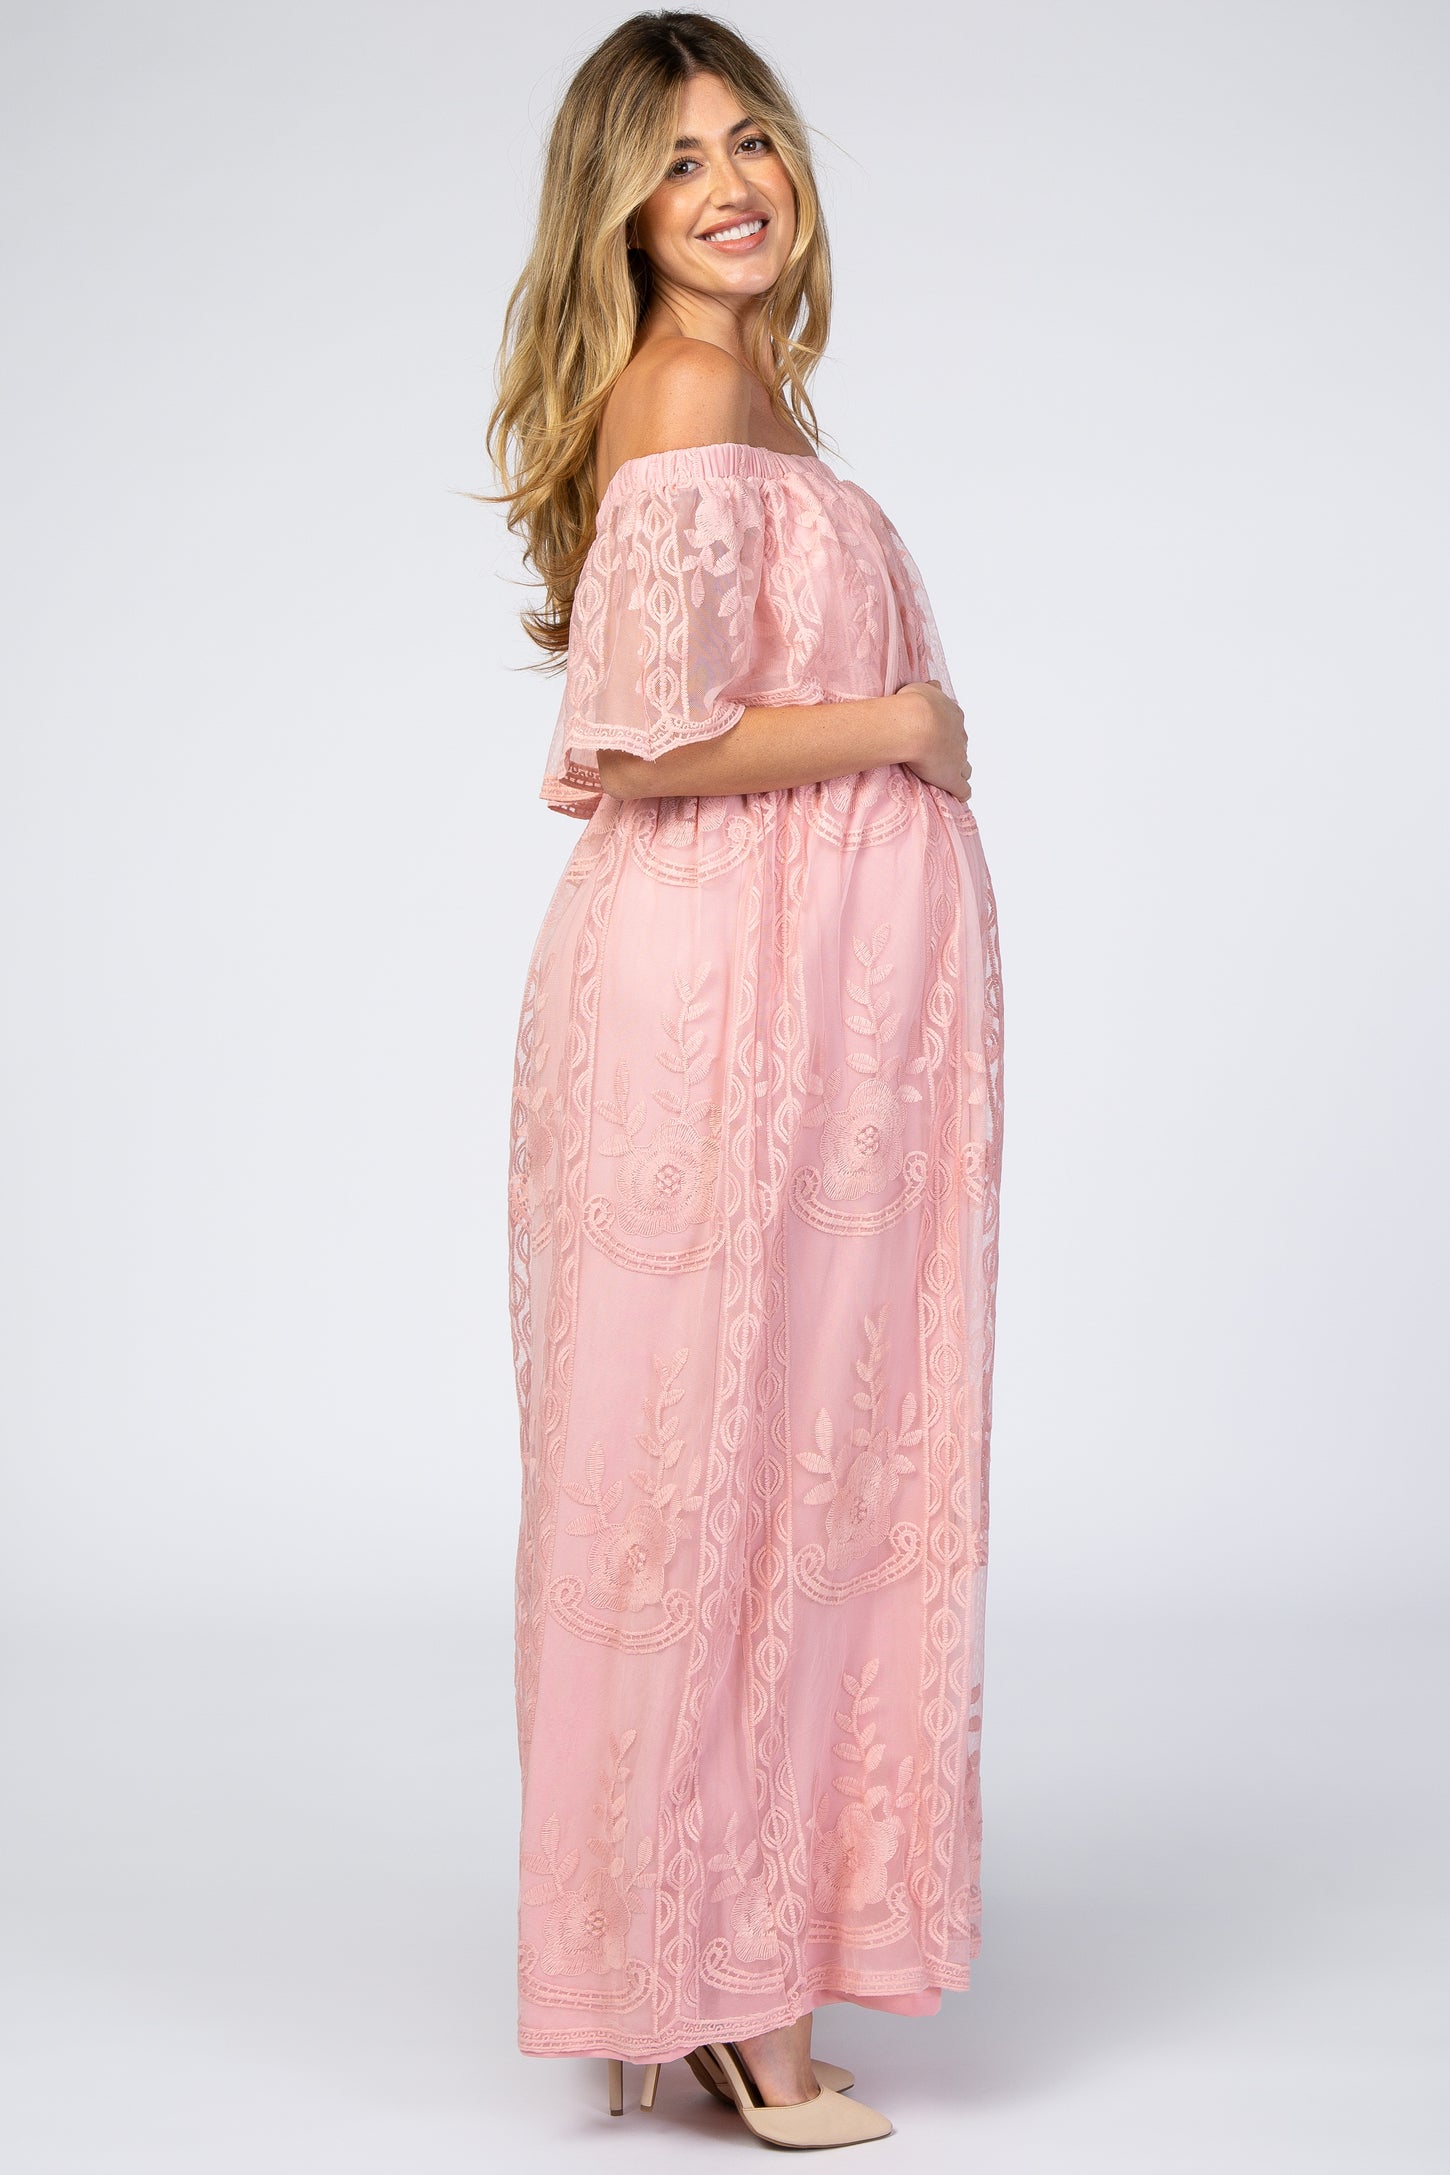 Pink Lace Overlay Off Shoulder Flounce Maternity Maxi Dress